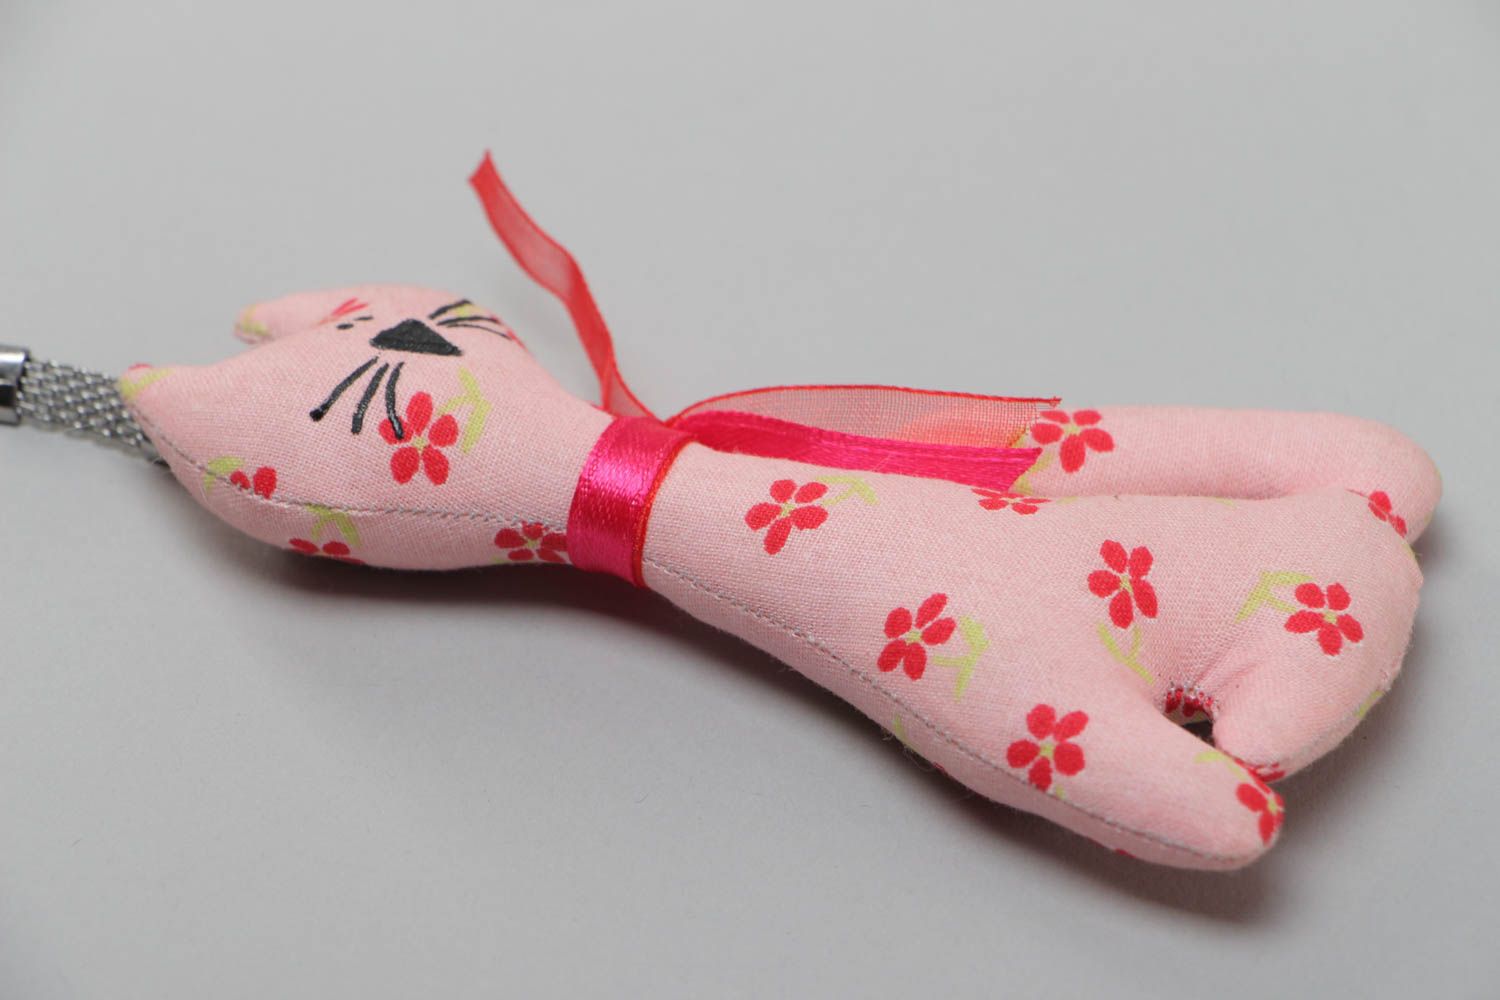 Handmade soft toy keychain sewn of pink polka dot cotton fabric in the shape of cat photo 3